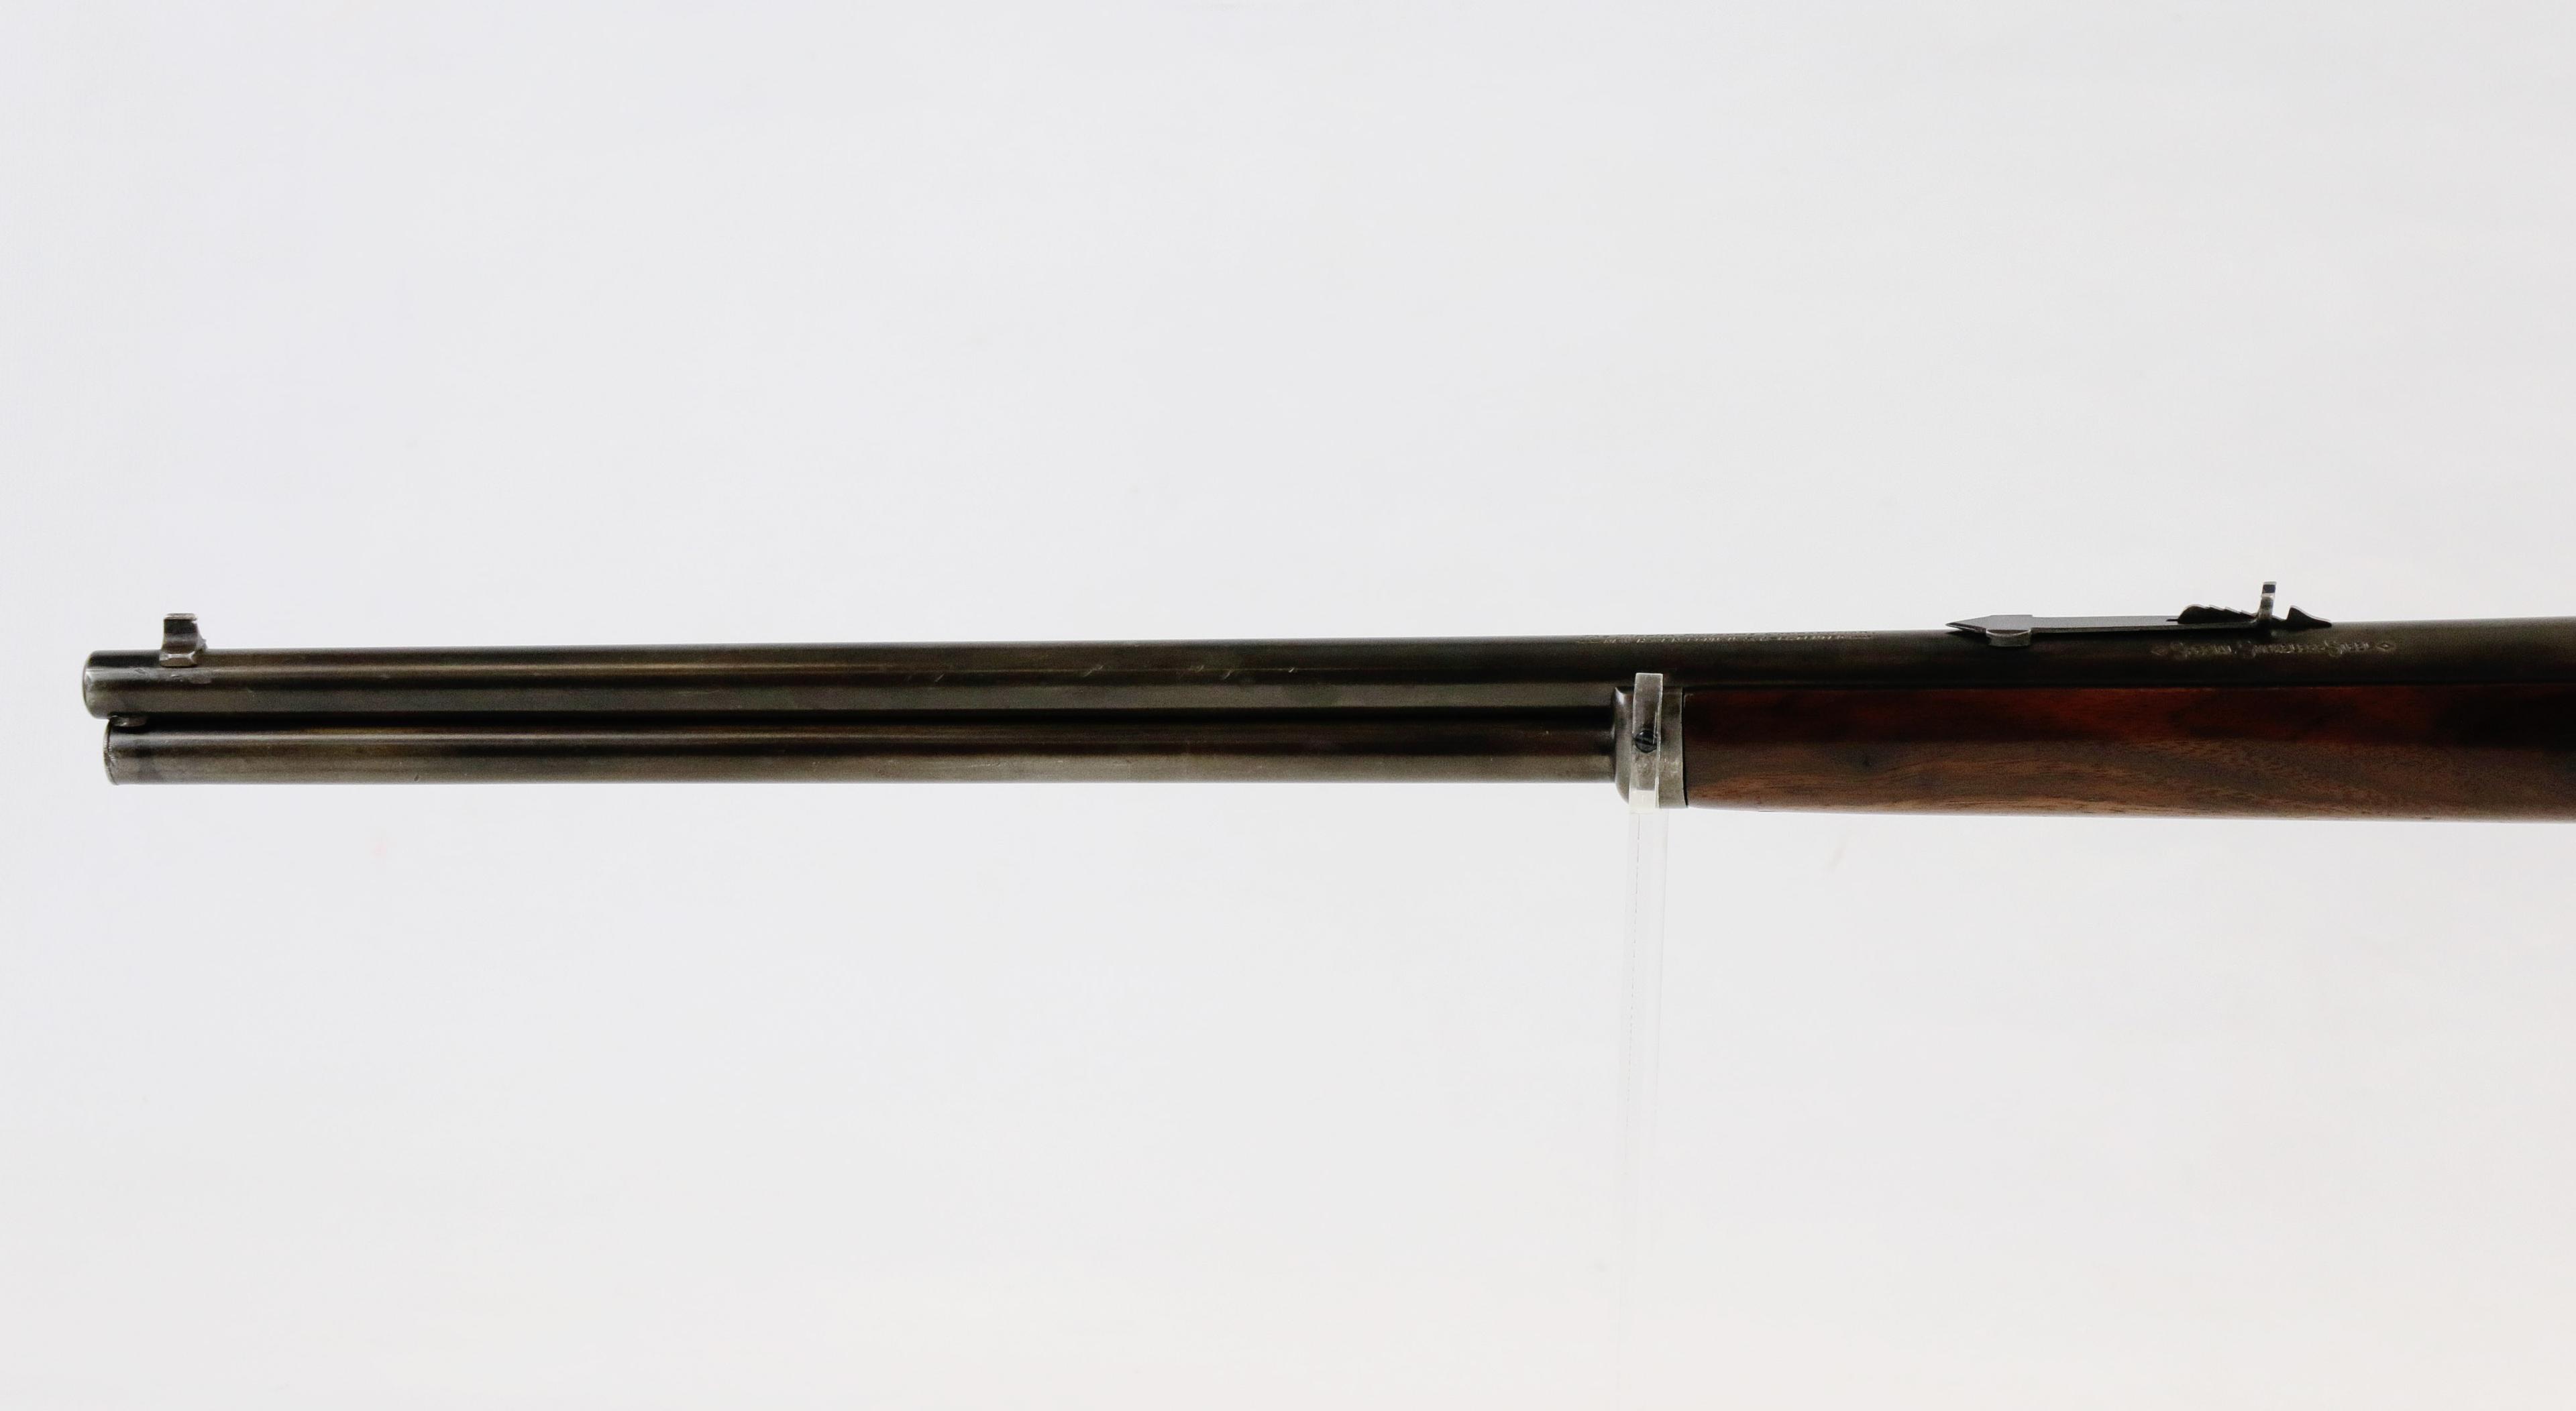 Marlin model 93 .30-30 lever action rifle